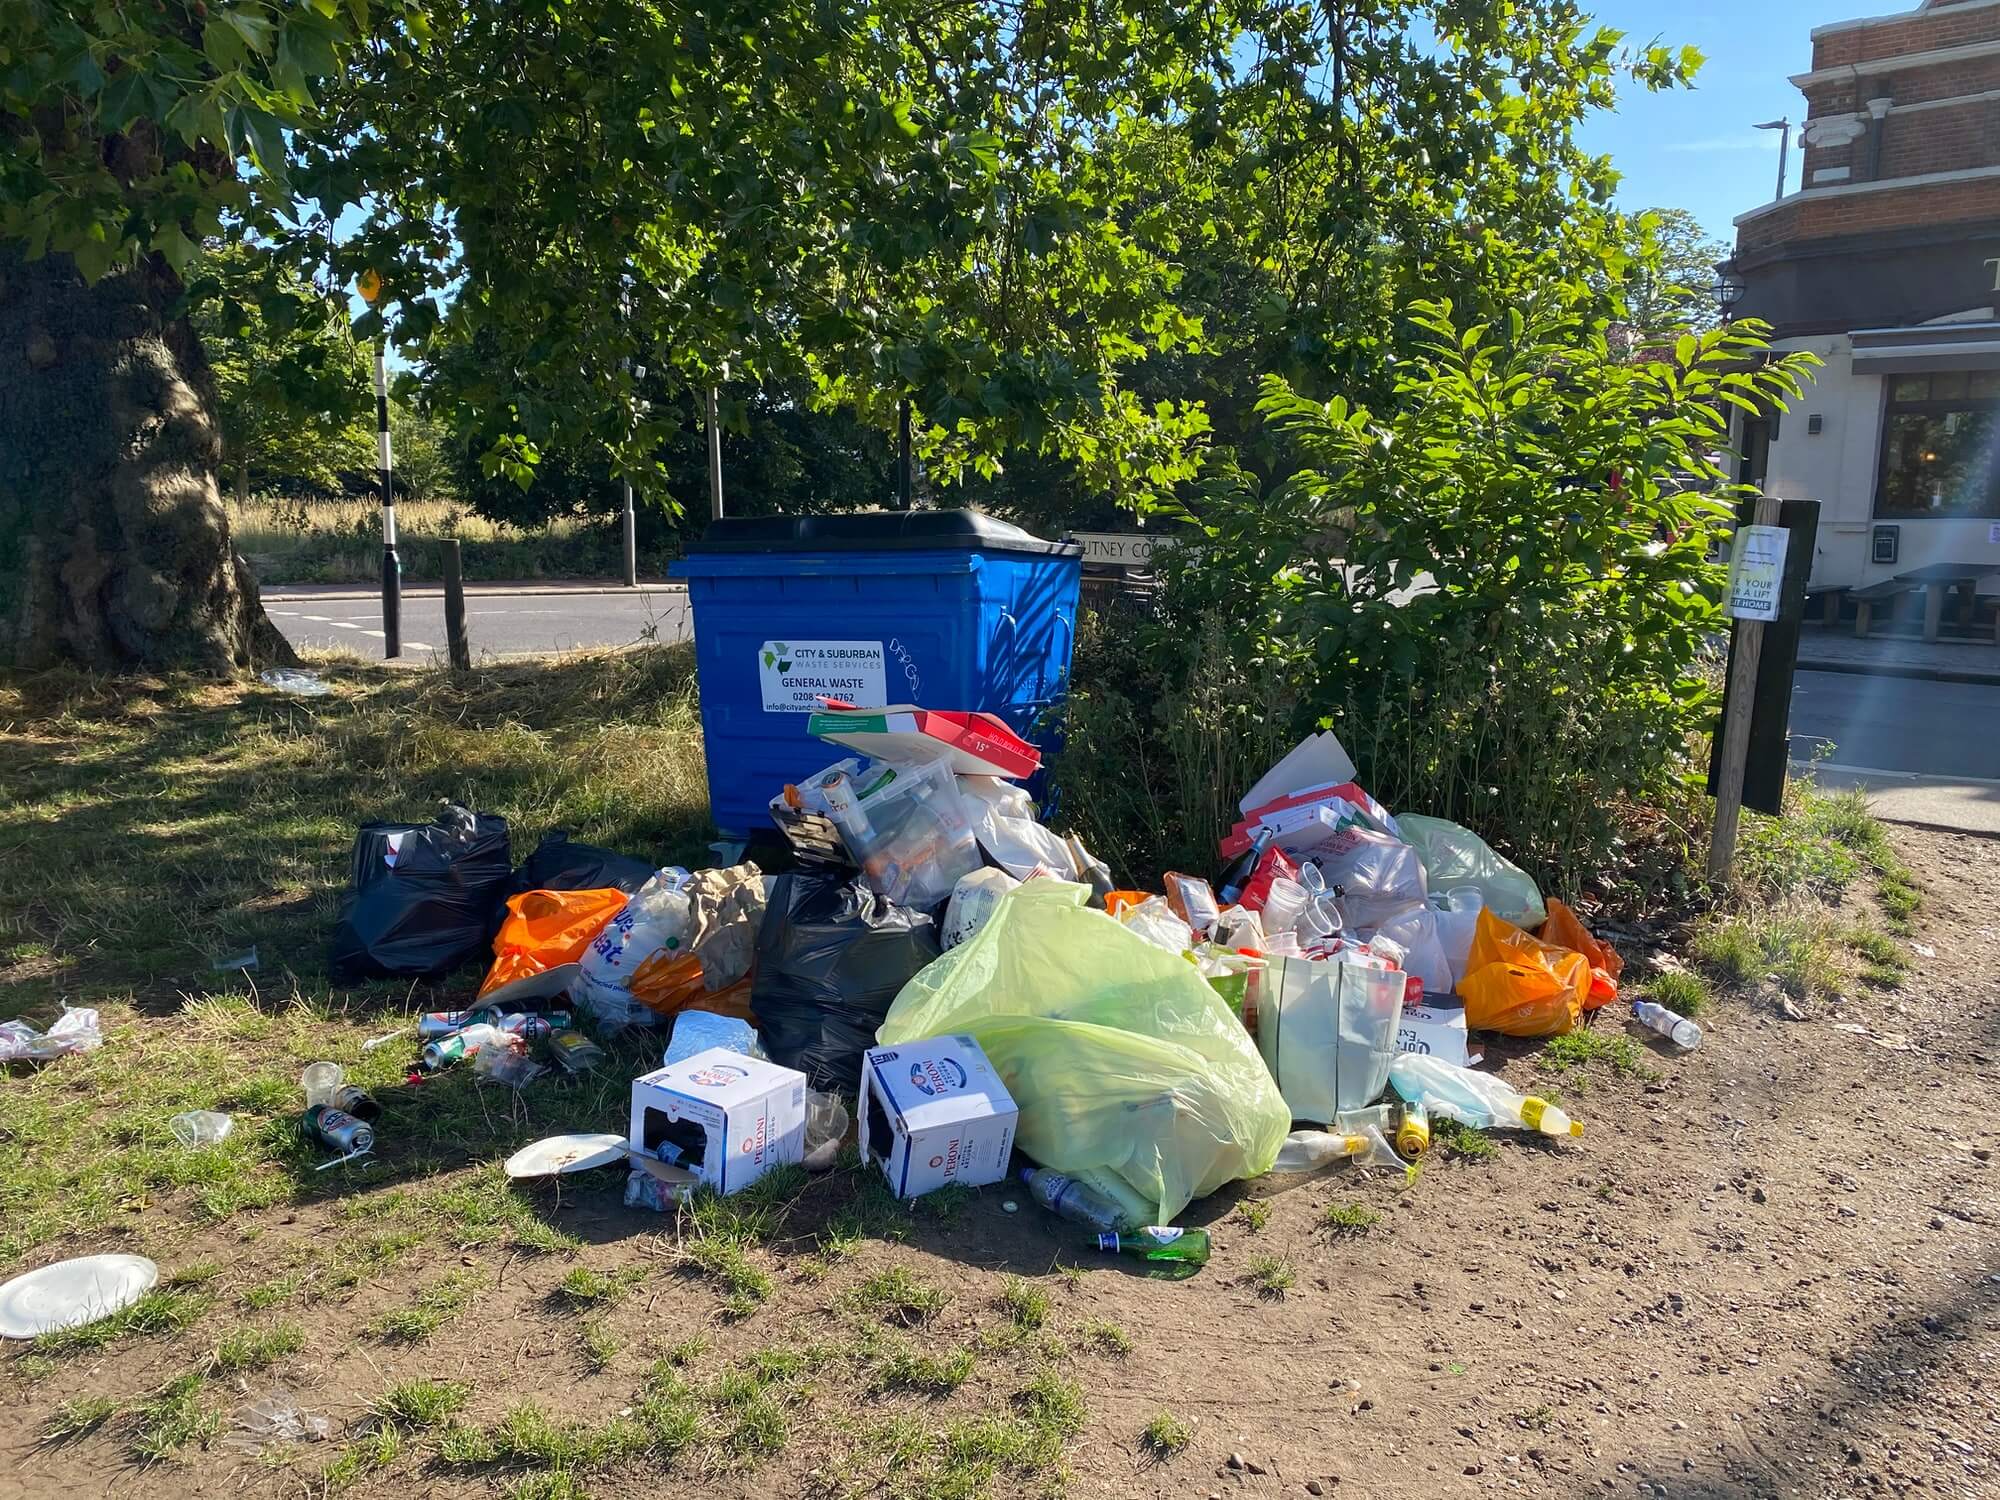 Rubbish piles up every day on Putney Common, generated by lockdown partying outdoors